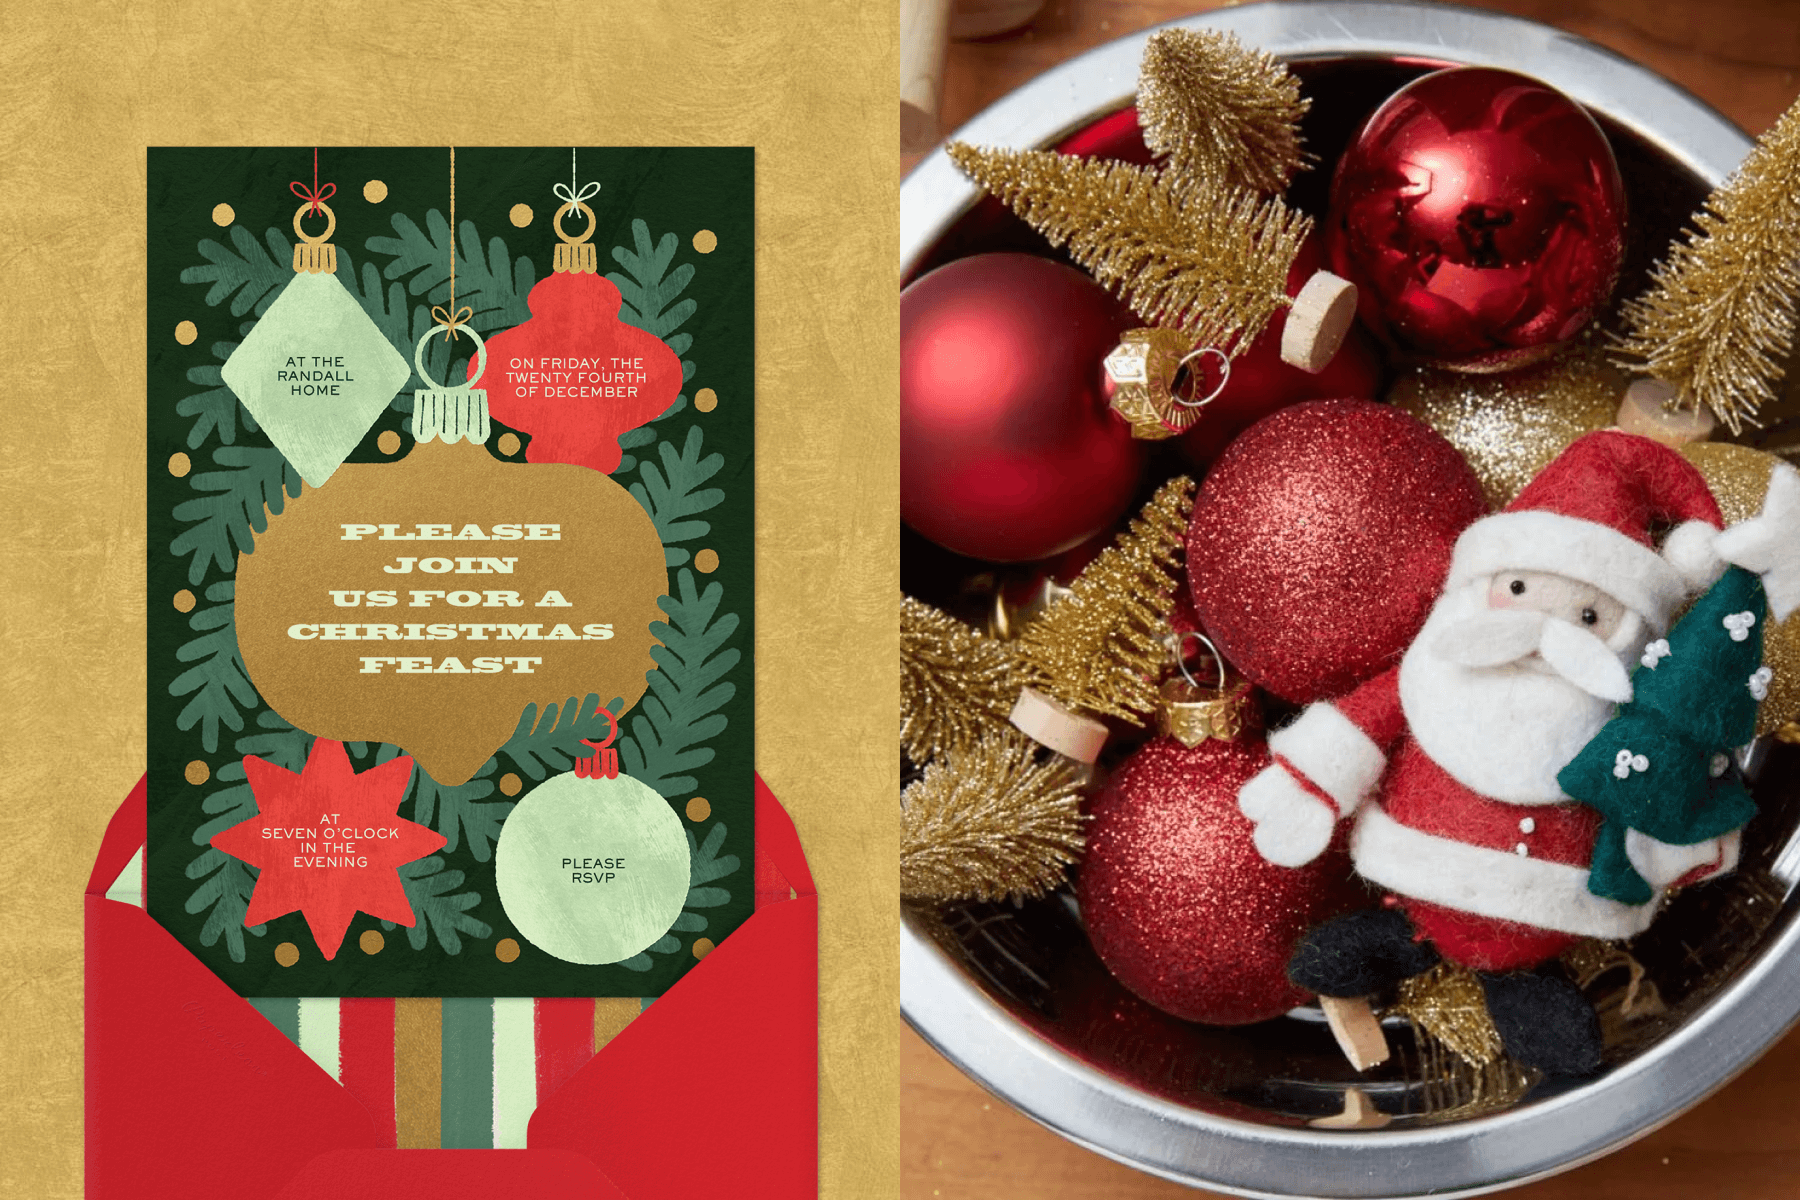 Left: A green Christmas invitation featuring illustrations of classic ornaments and pine branches in gold, red, and light green.